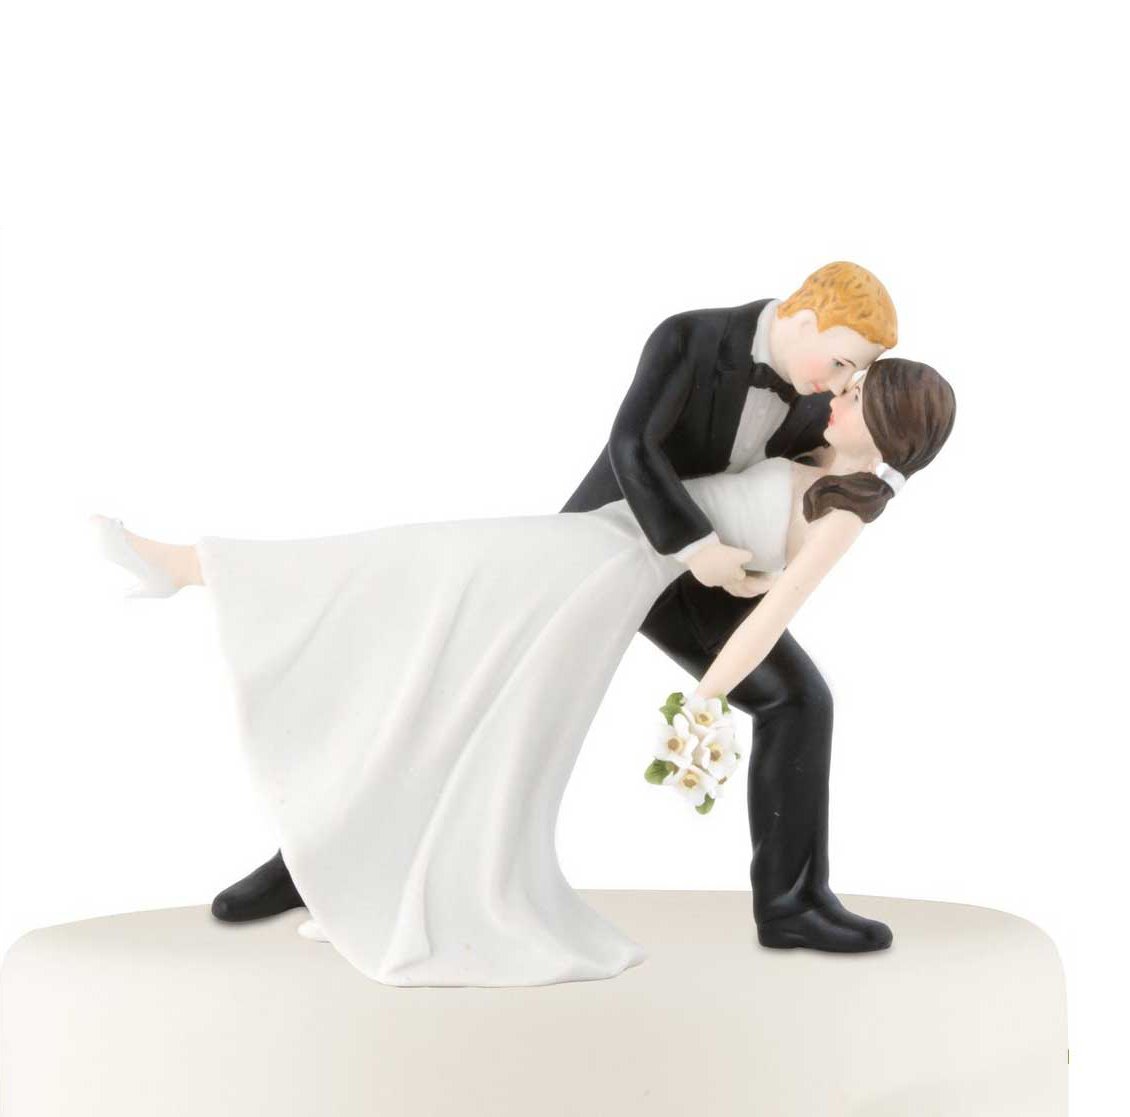 Wedding Gift, “Best Day Ever”, Wedding Cake Topper Bride and Groom